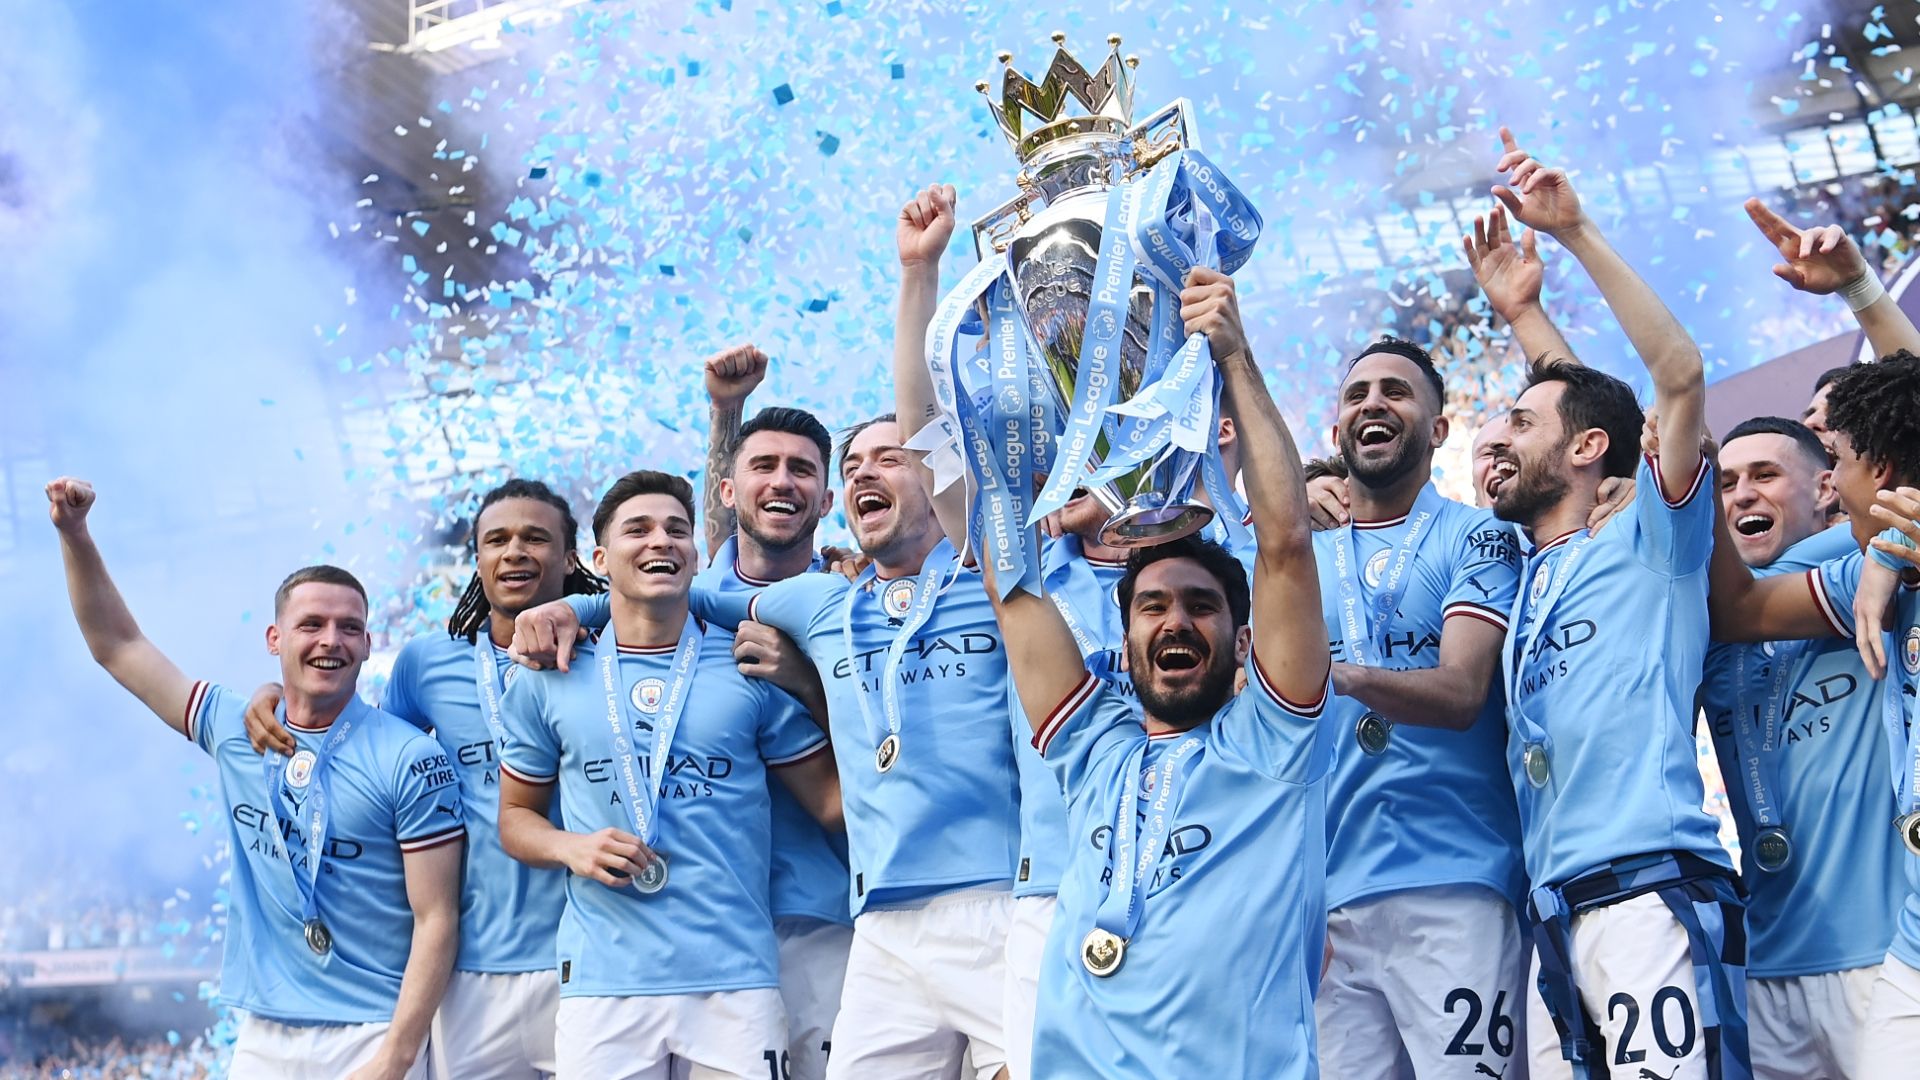 Do financial charges against Man City tarnish Premier League dominance